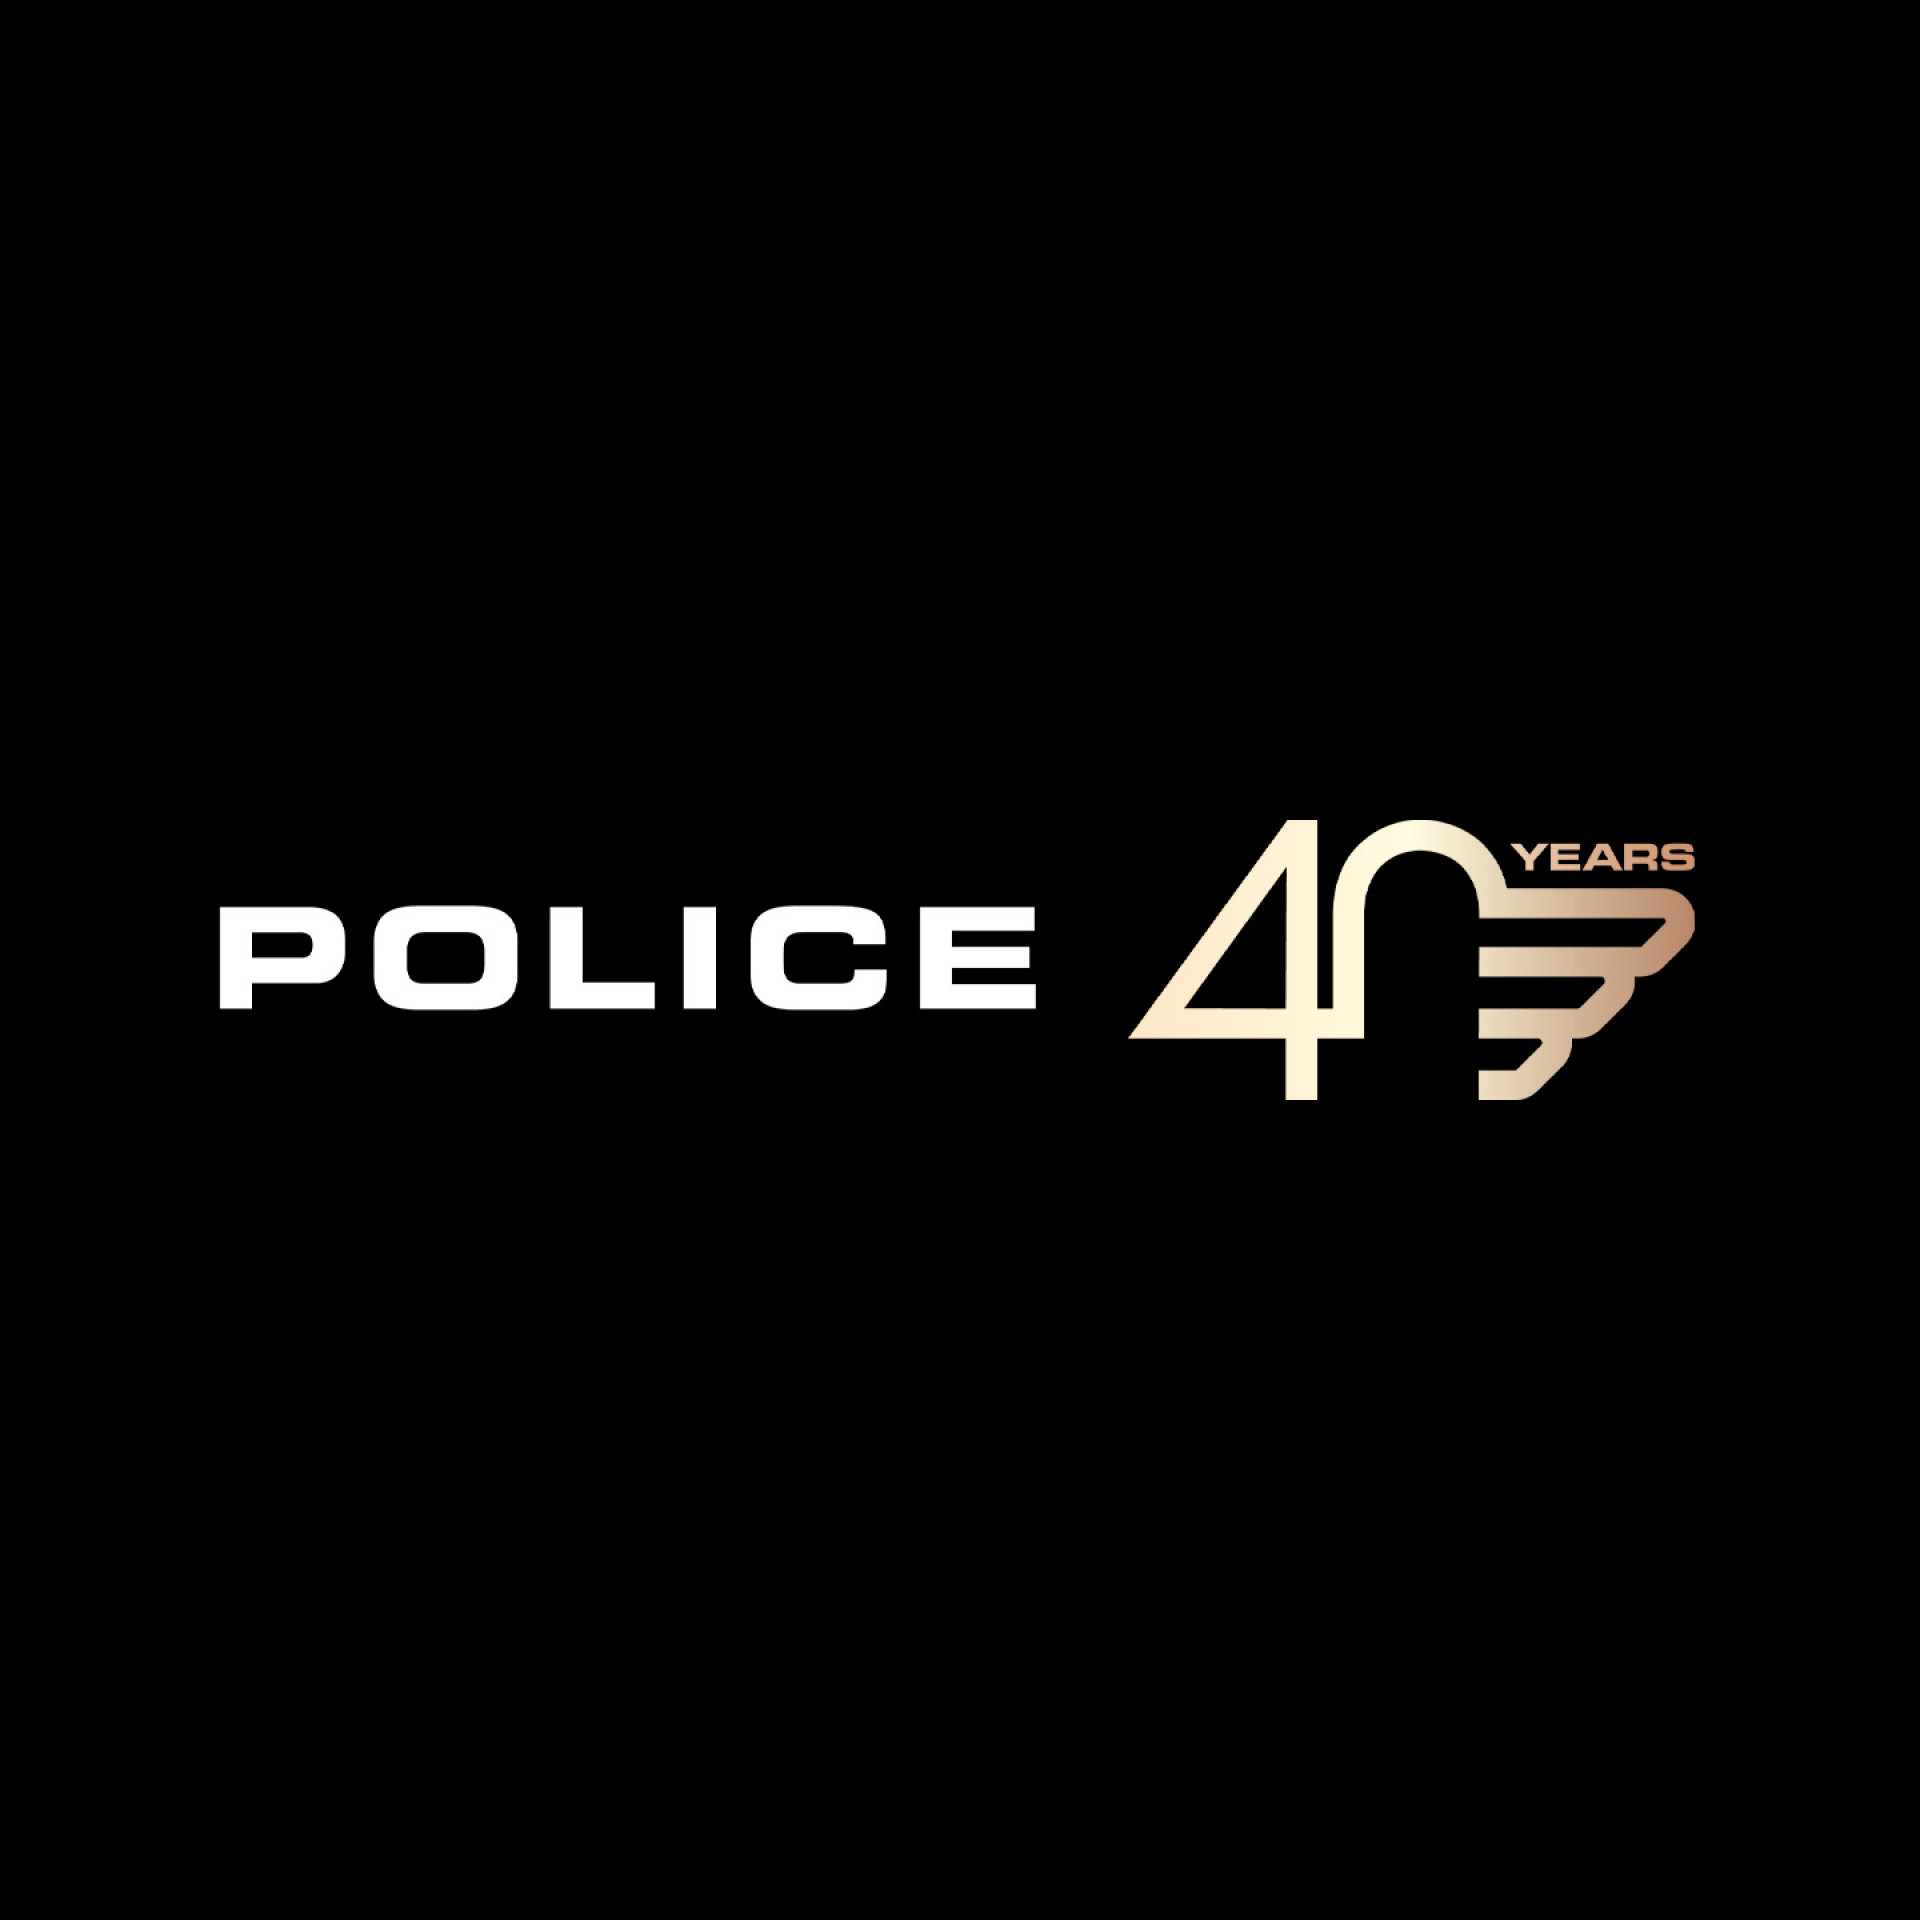 POLICE TURNS 40